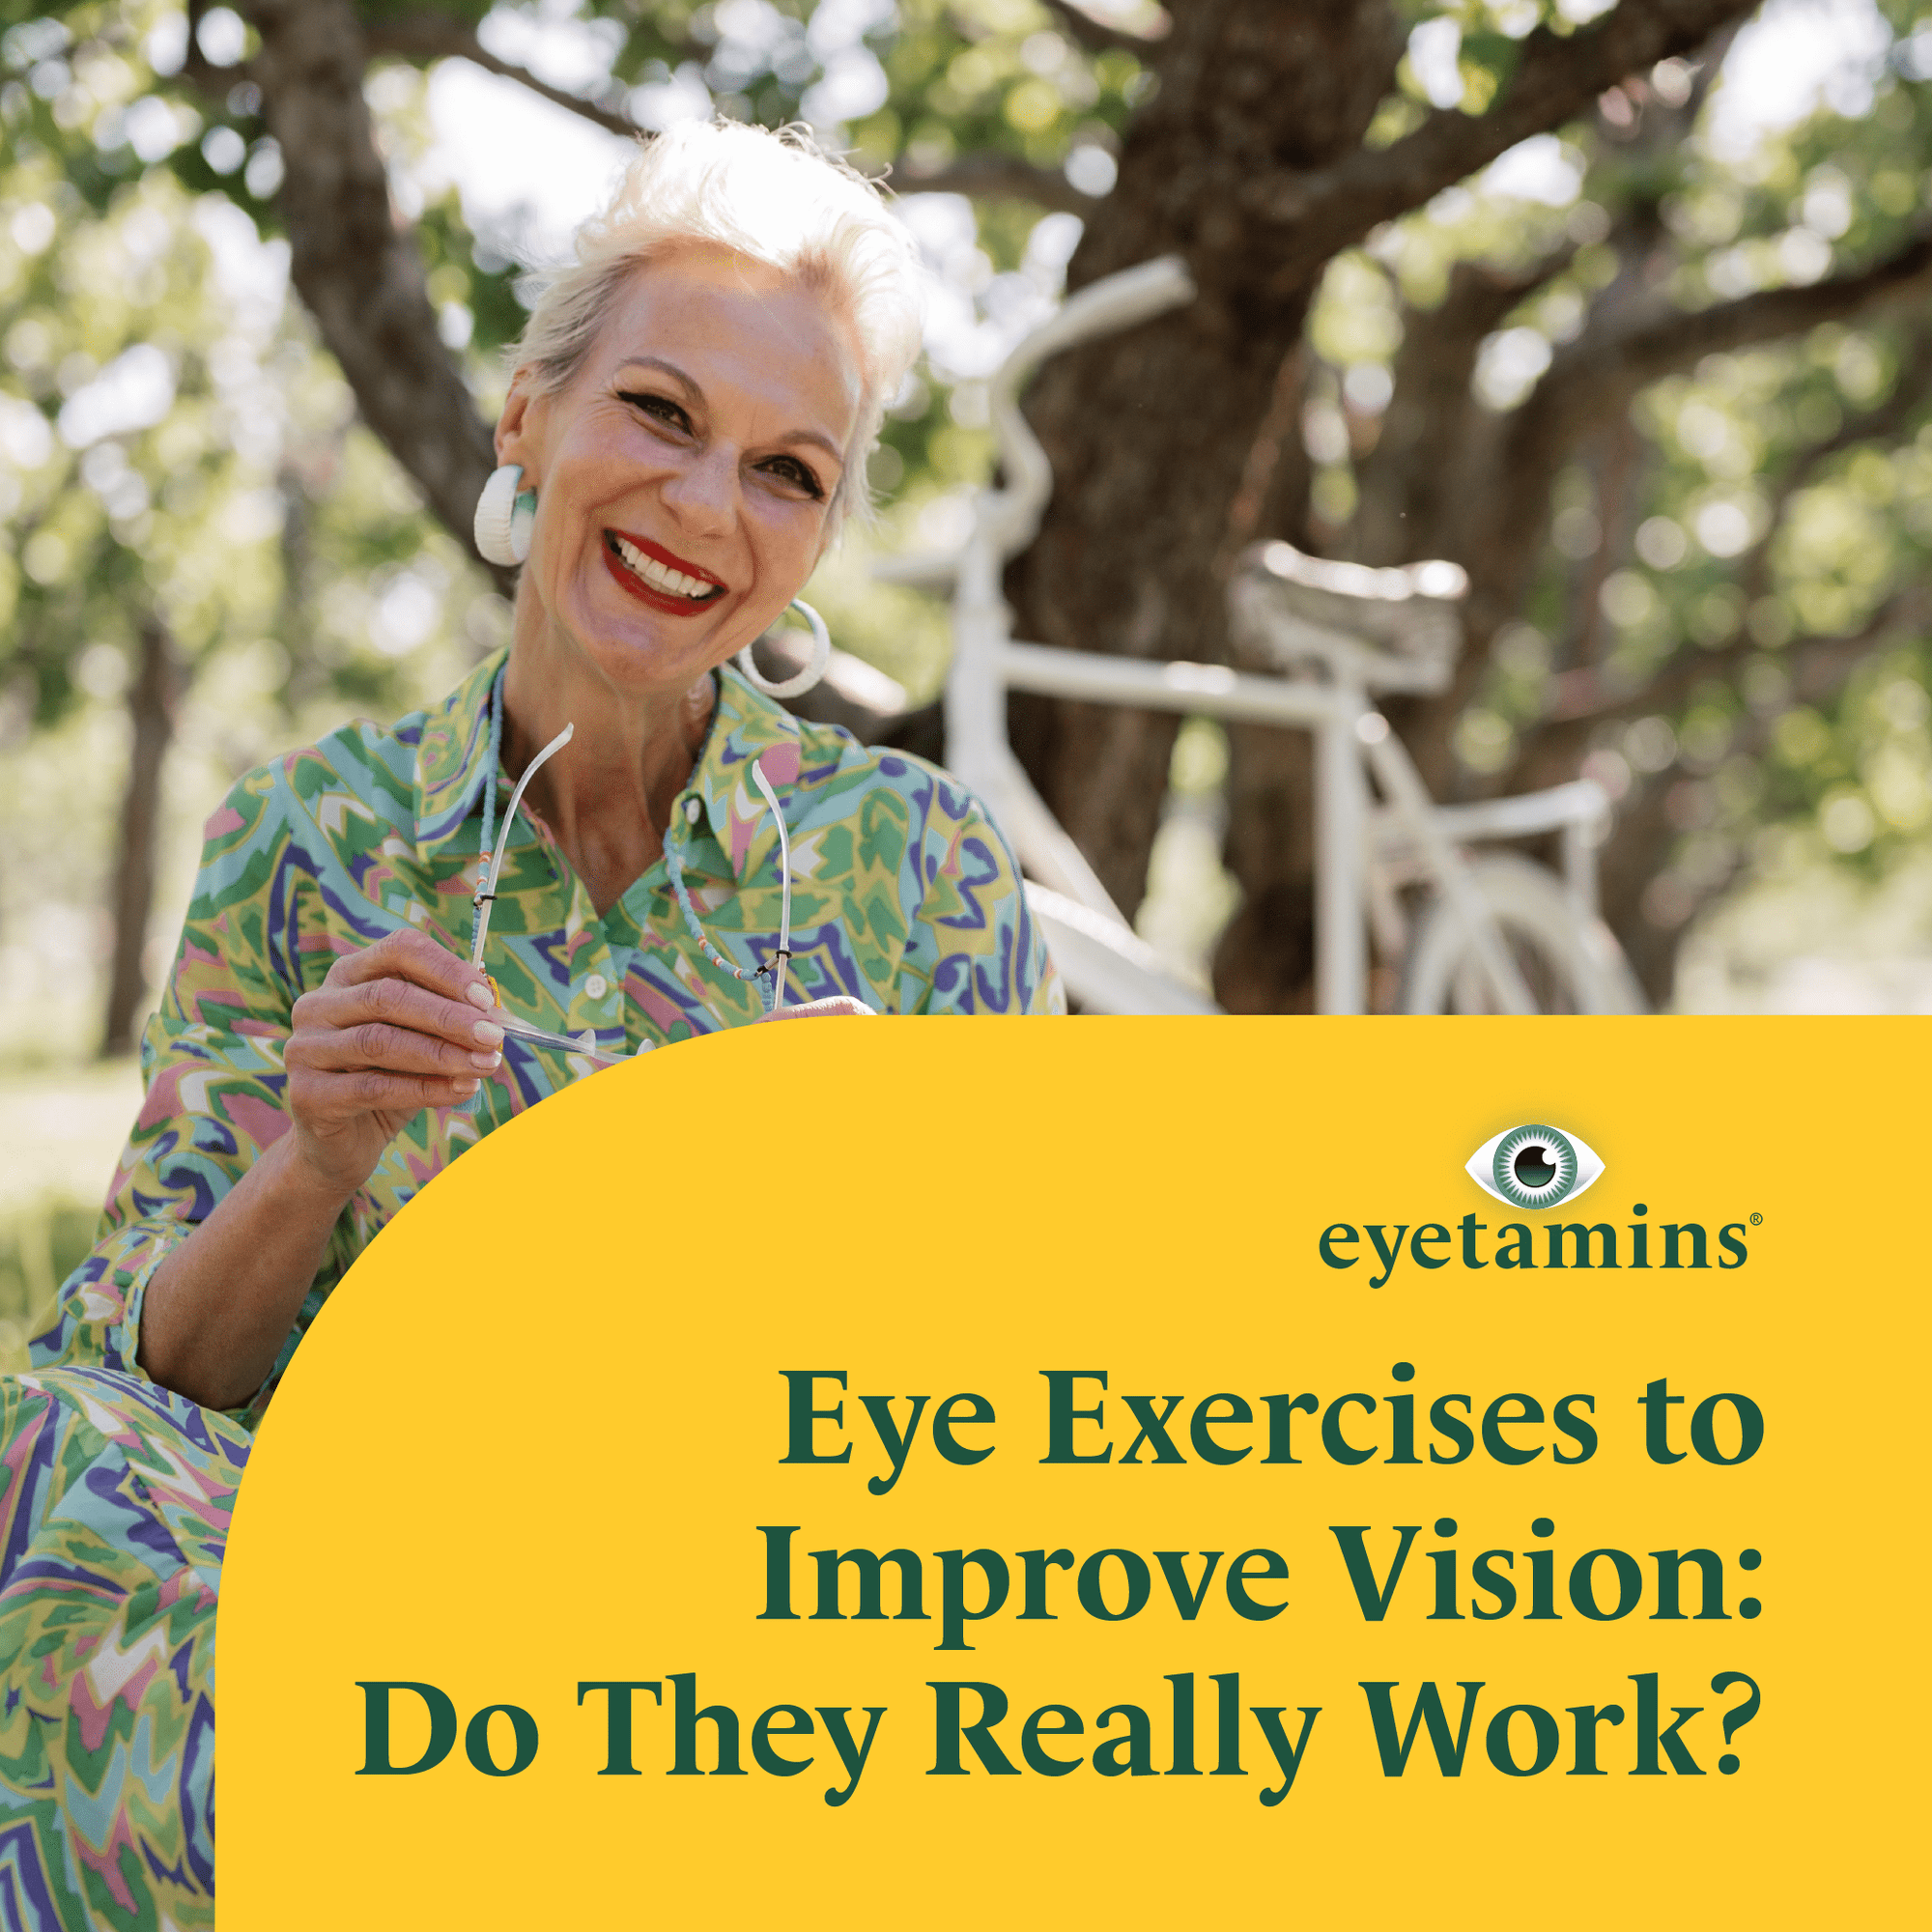 Eyetamins - Eye Exercises to Improve Vision: Do They Really Work?